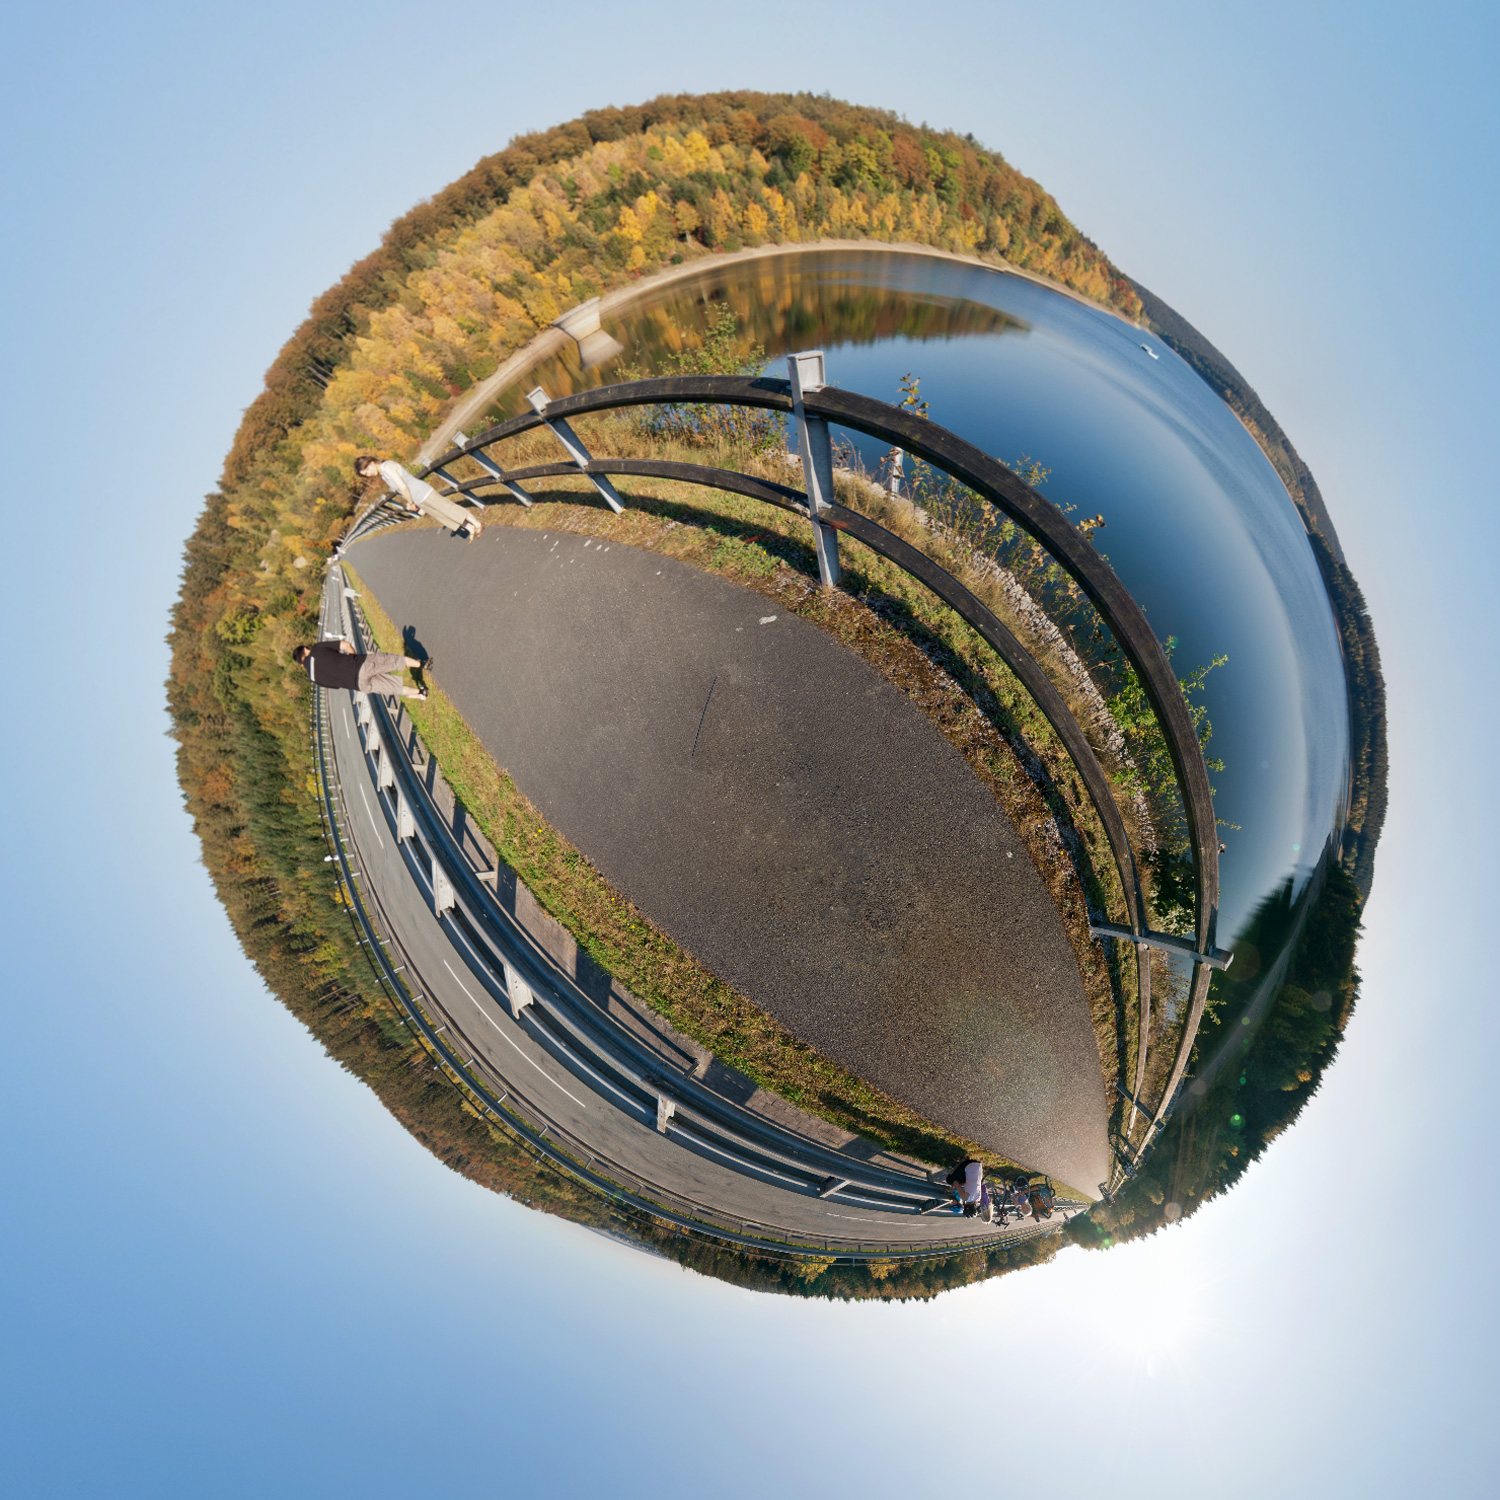 Panorama 092 - Little Planet